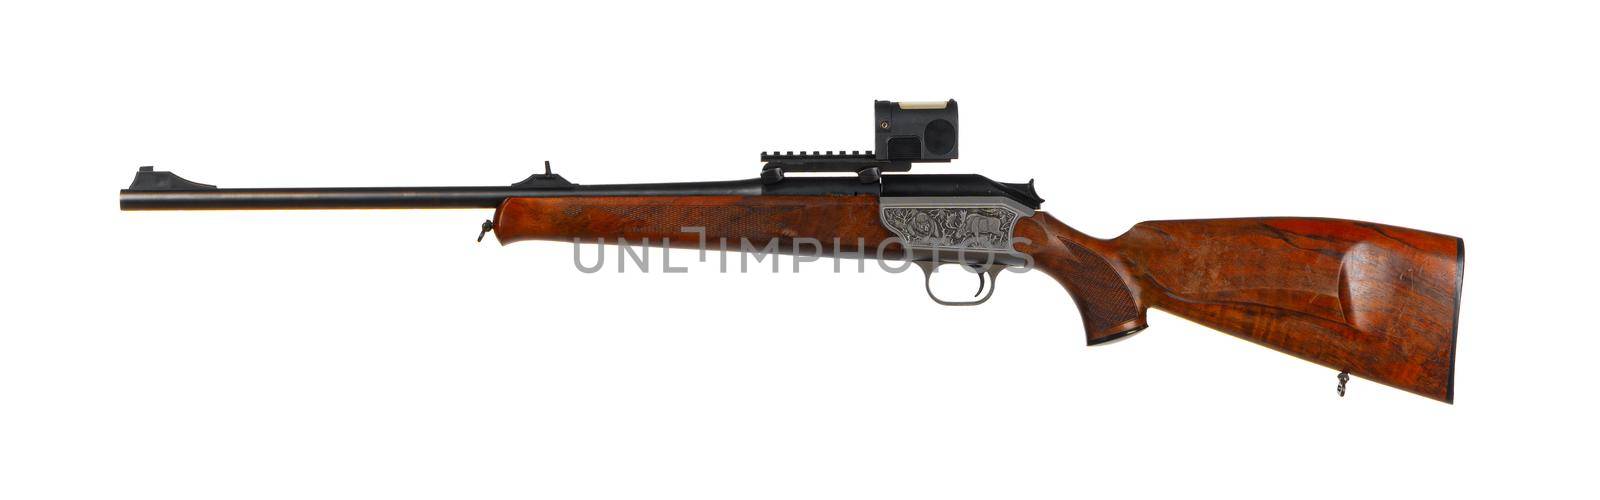 Modern hunting rifle isolated on white background close up